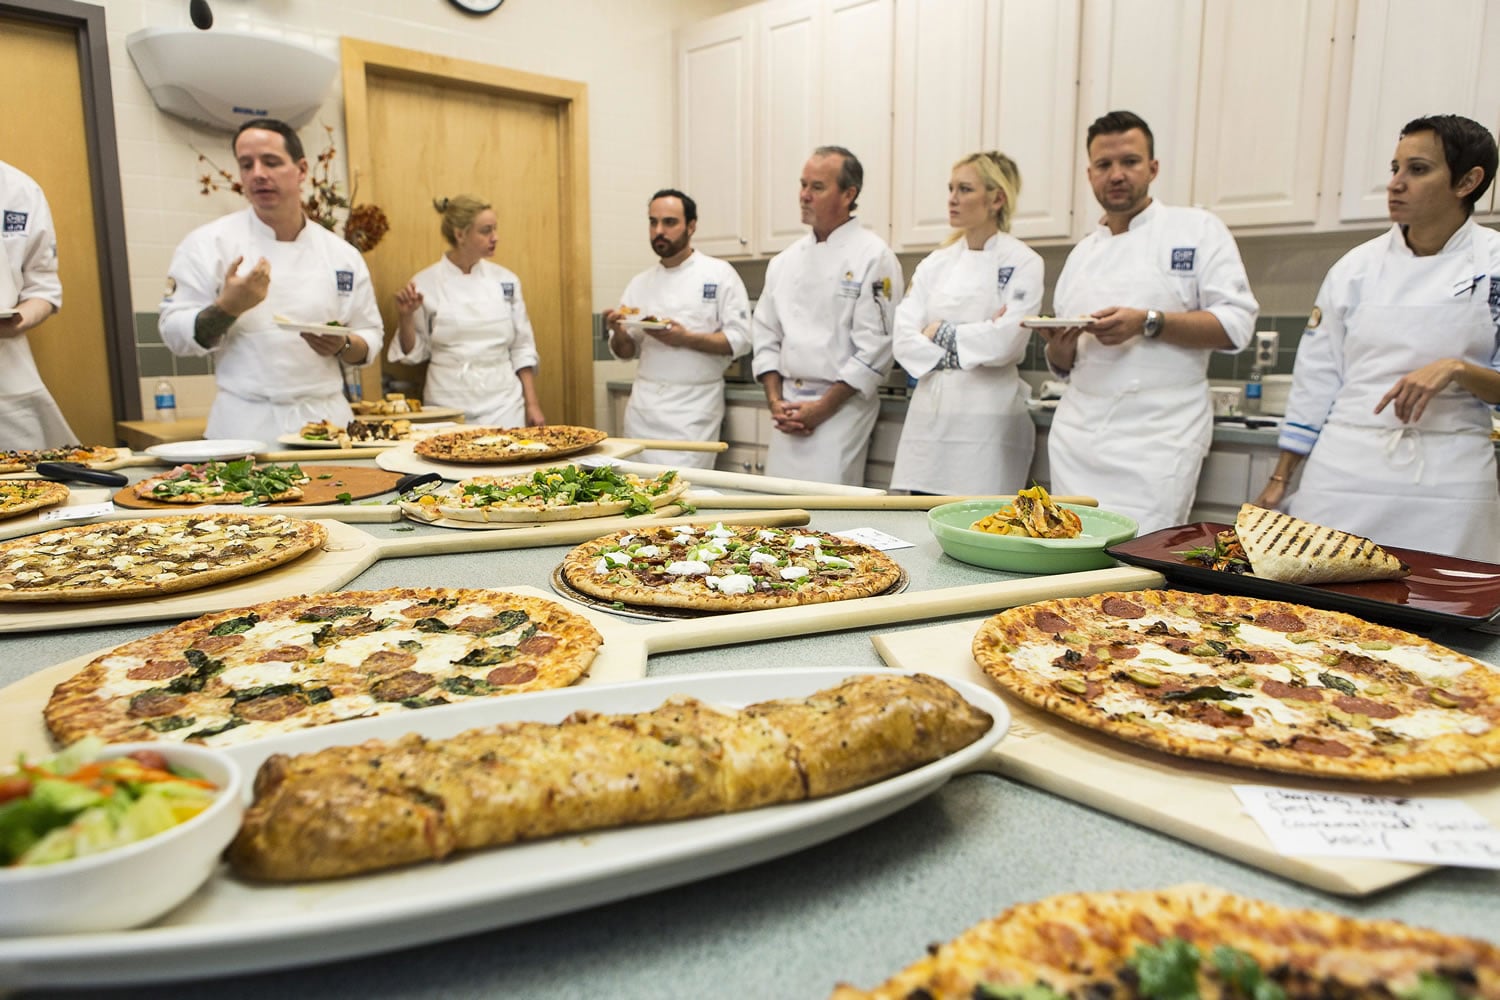 Chefs participating in the 2015 Chef Collective discuss dishes at the Schwan Food Company facilities in Marshall, Minn., in October.